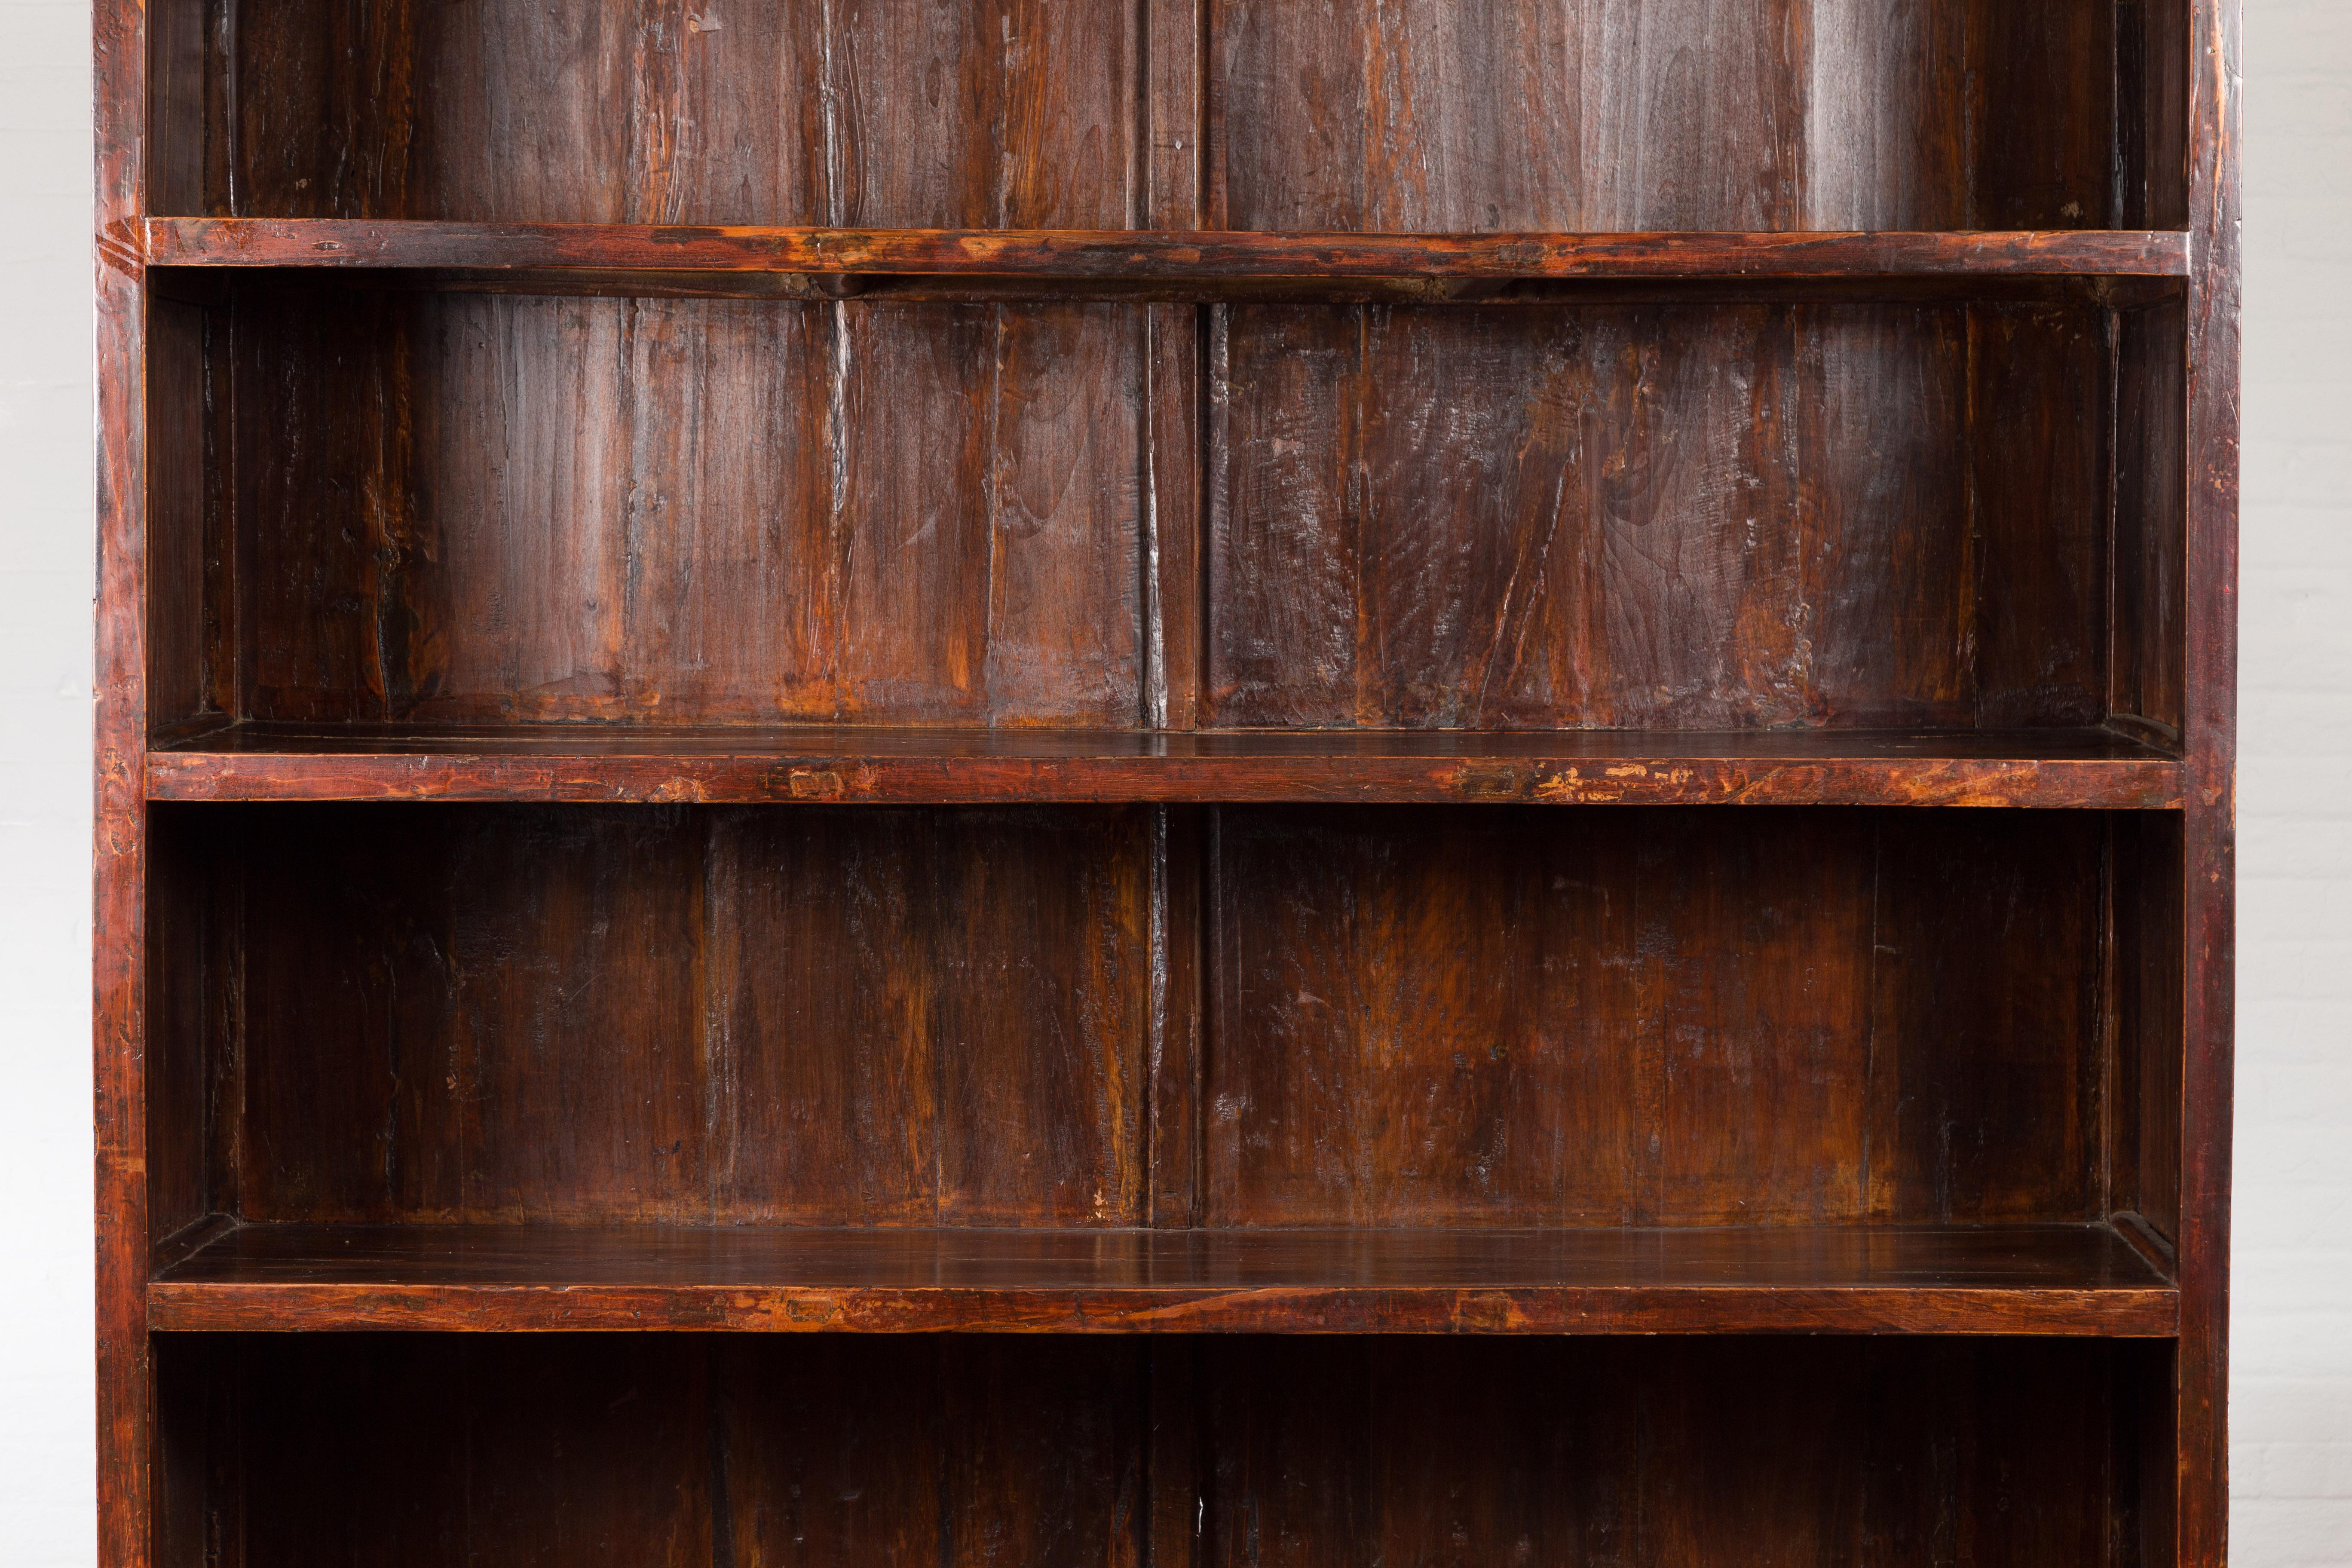 Chinese Qing Dynasty 19th Century Bookcase with Four Shelves and Dark Patina For Sale 2